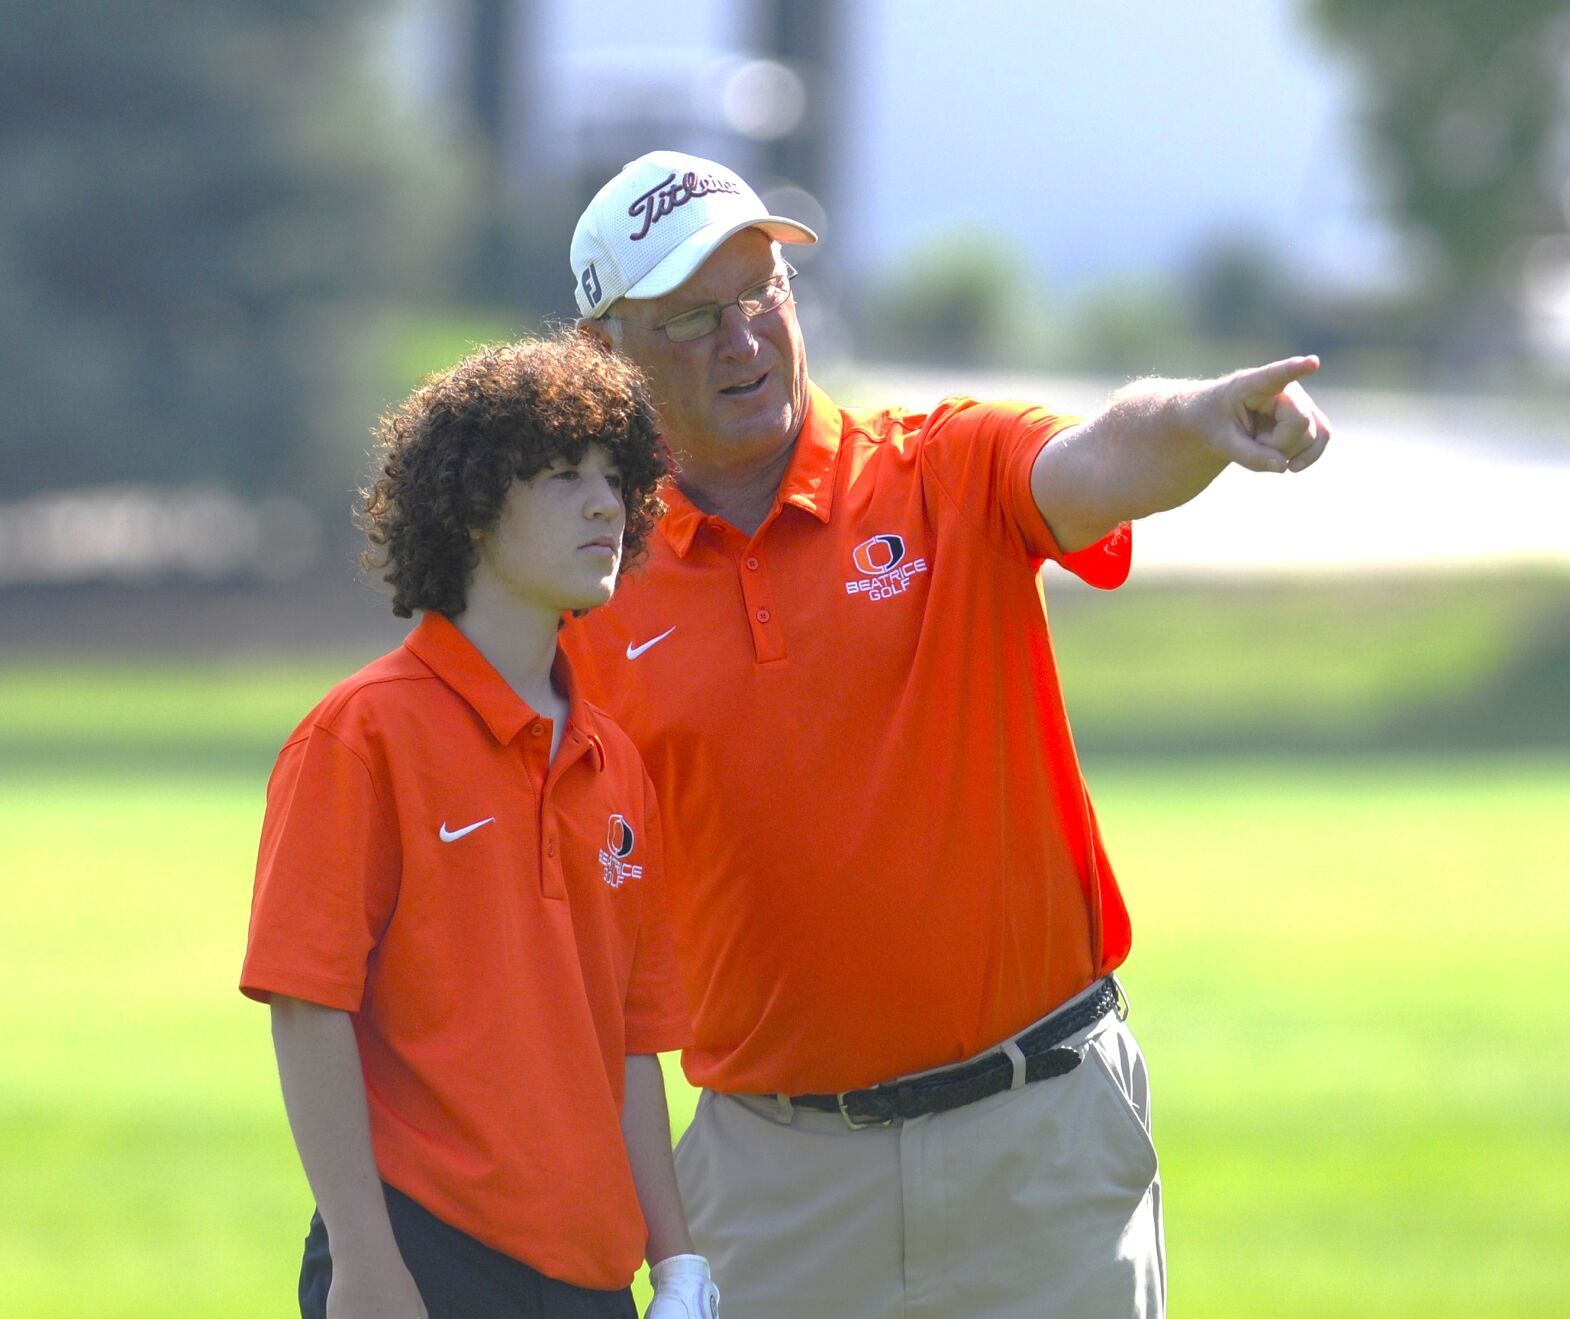 Beatrice High School Golf Coach Retires After Legendary 37-Year Career